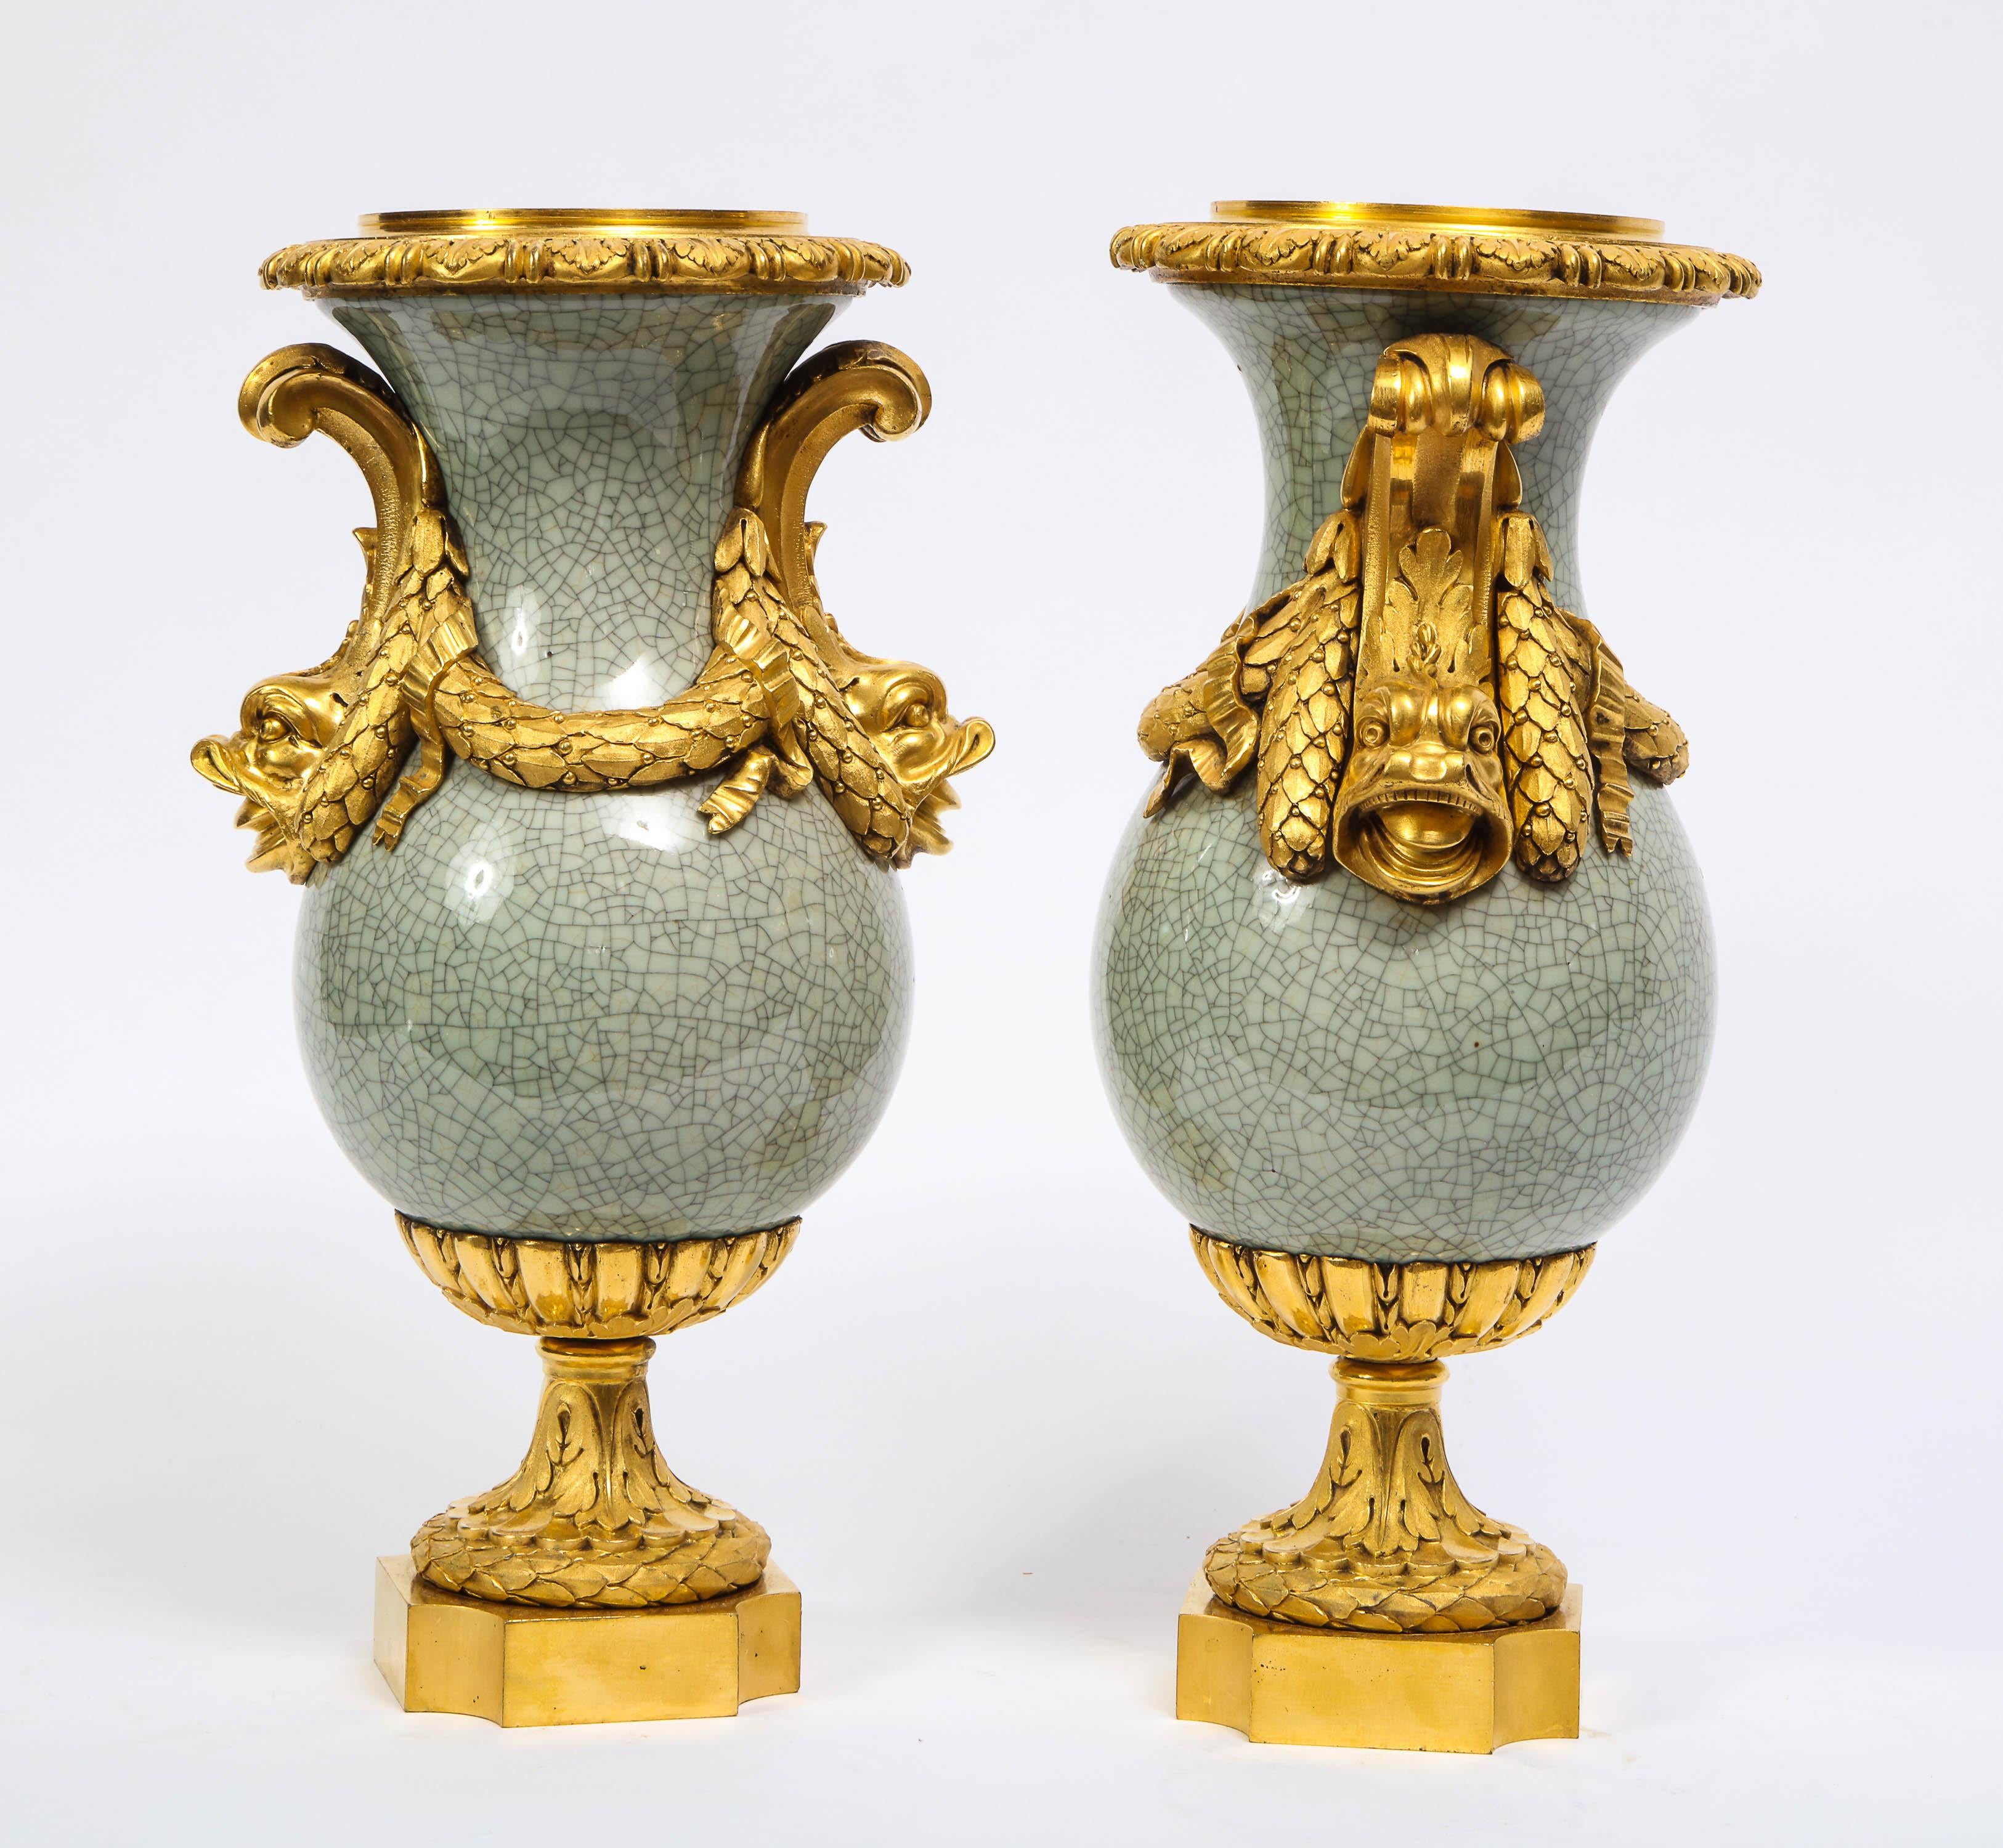 French Louis XVI Ormolu-Mounted Chinese Celadon Crackle Vases with Dolphin Handles For Sale